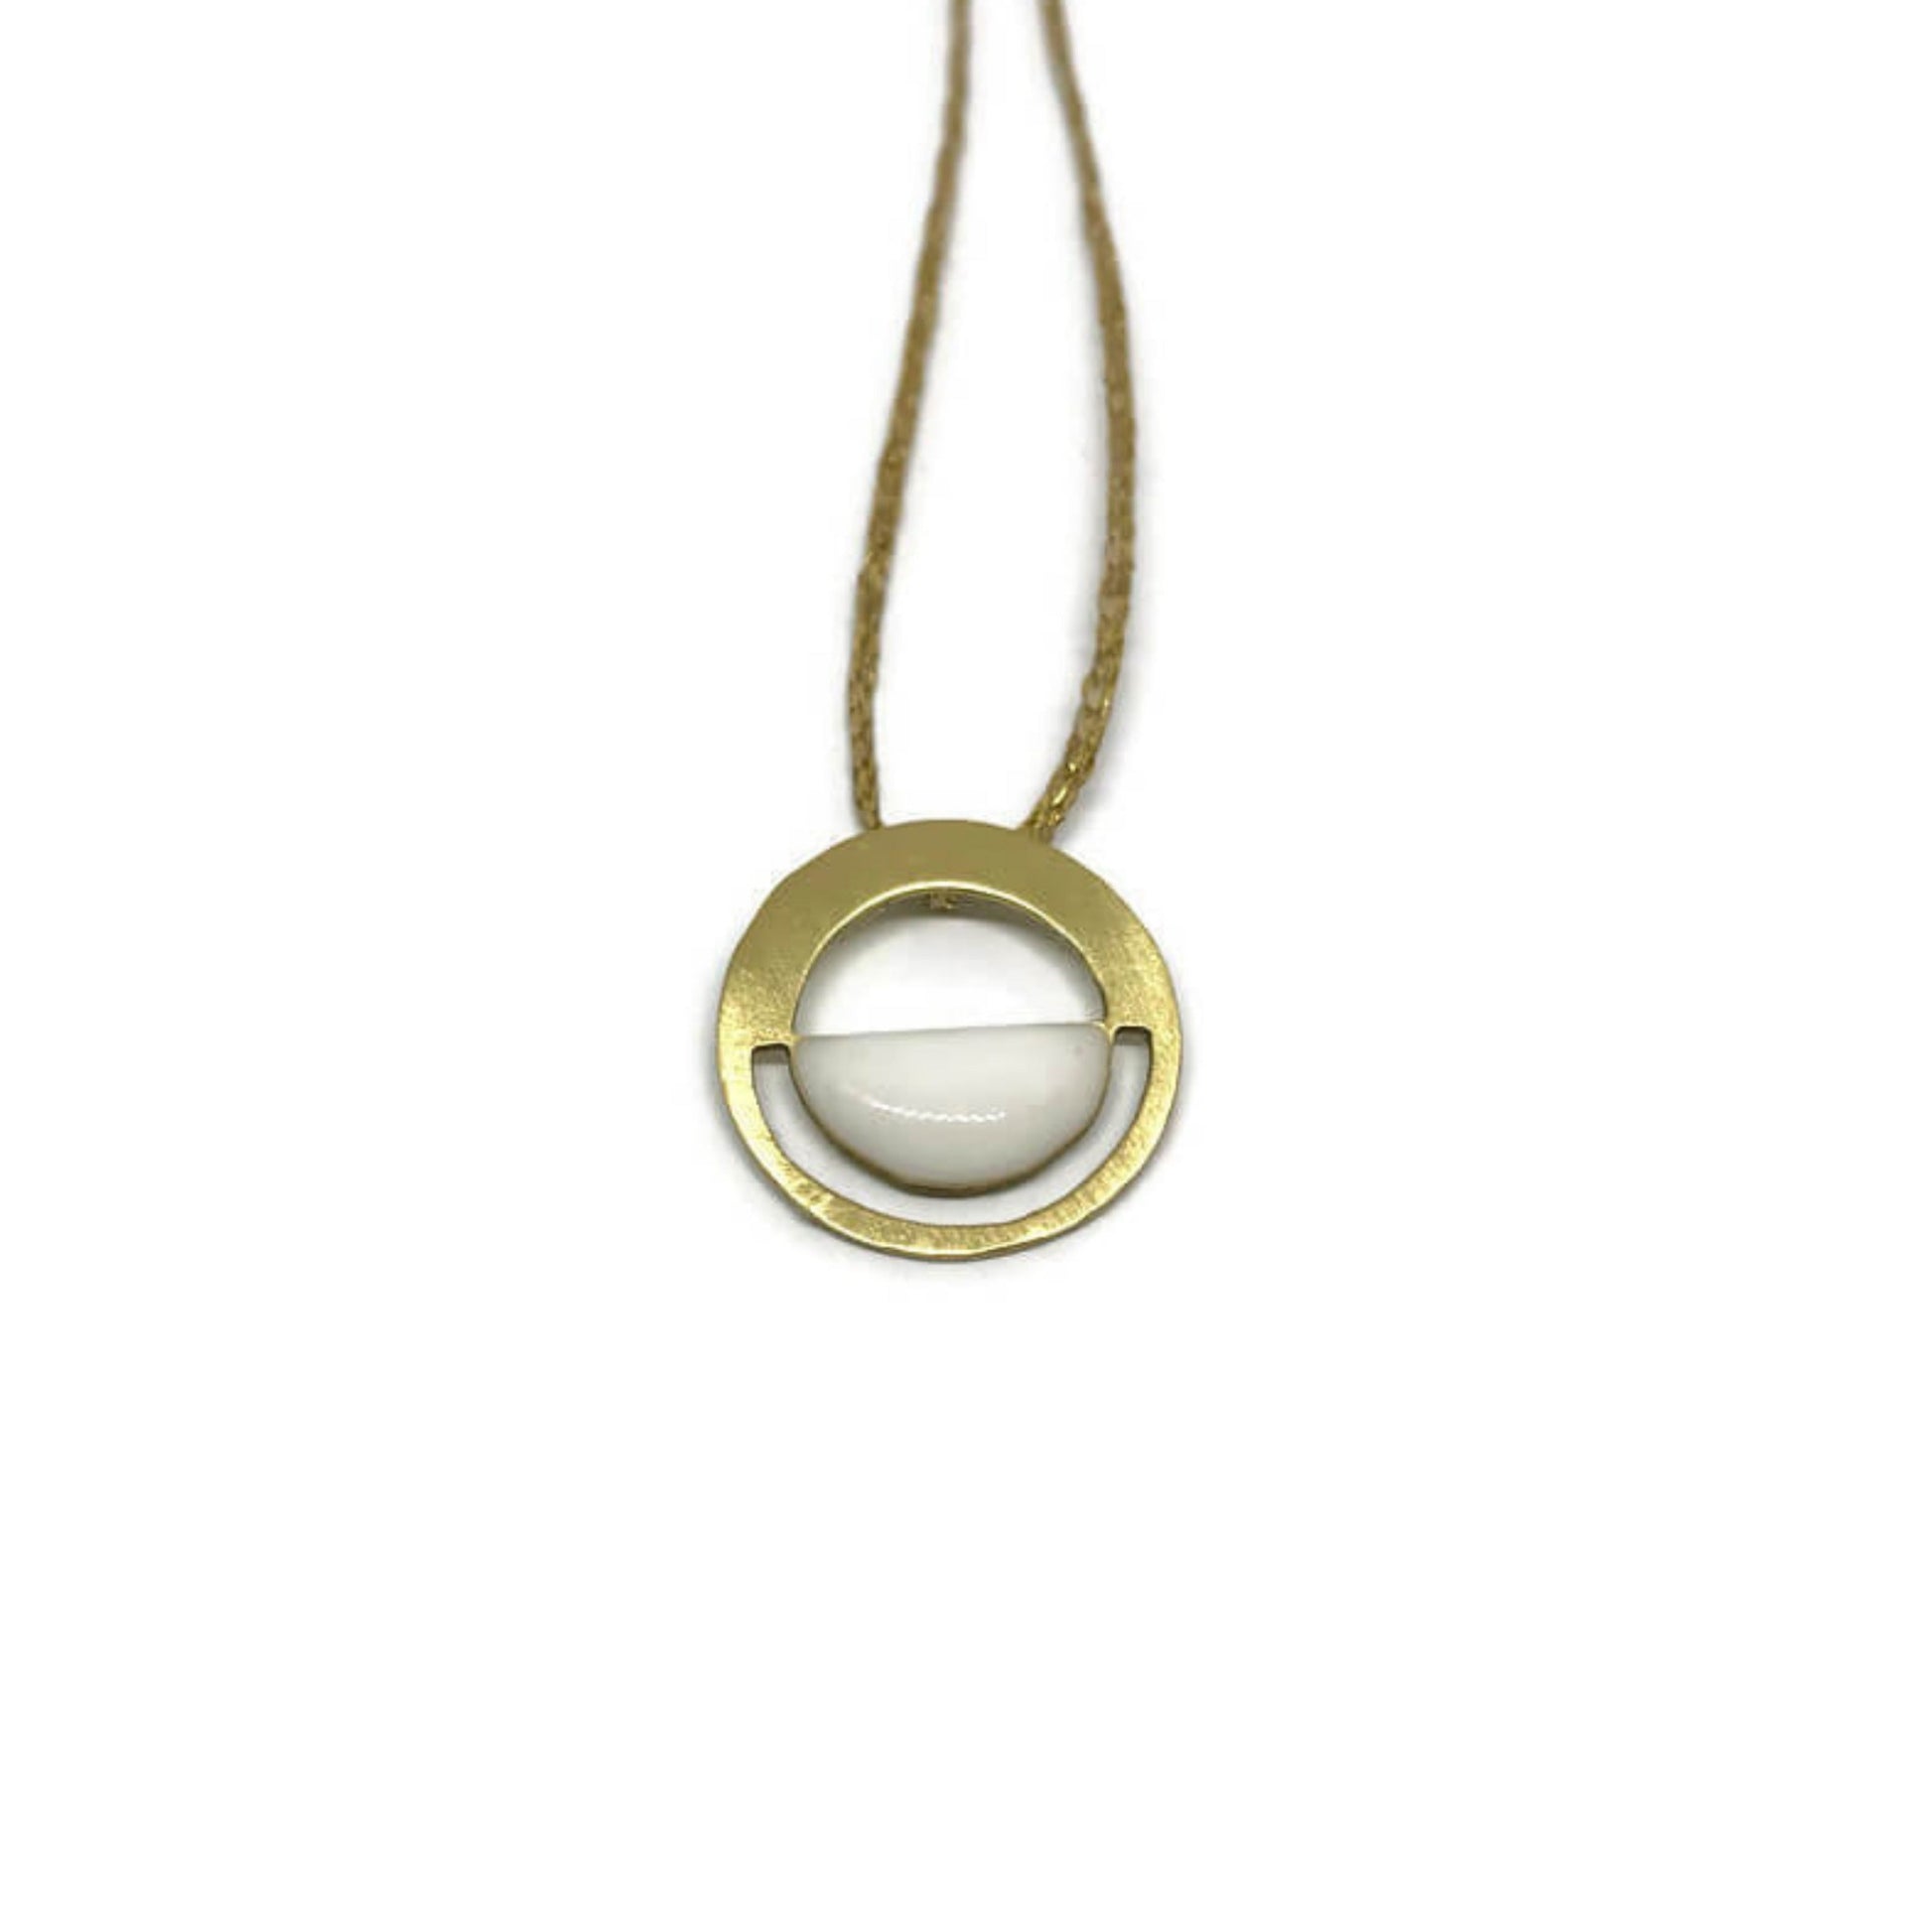 Brass necklace with resin | Allure Necklace - CURIUDO